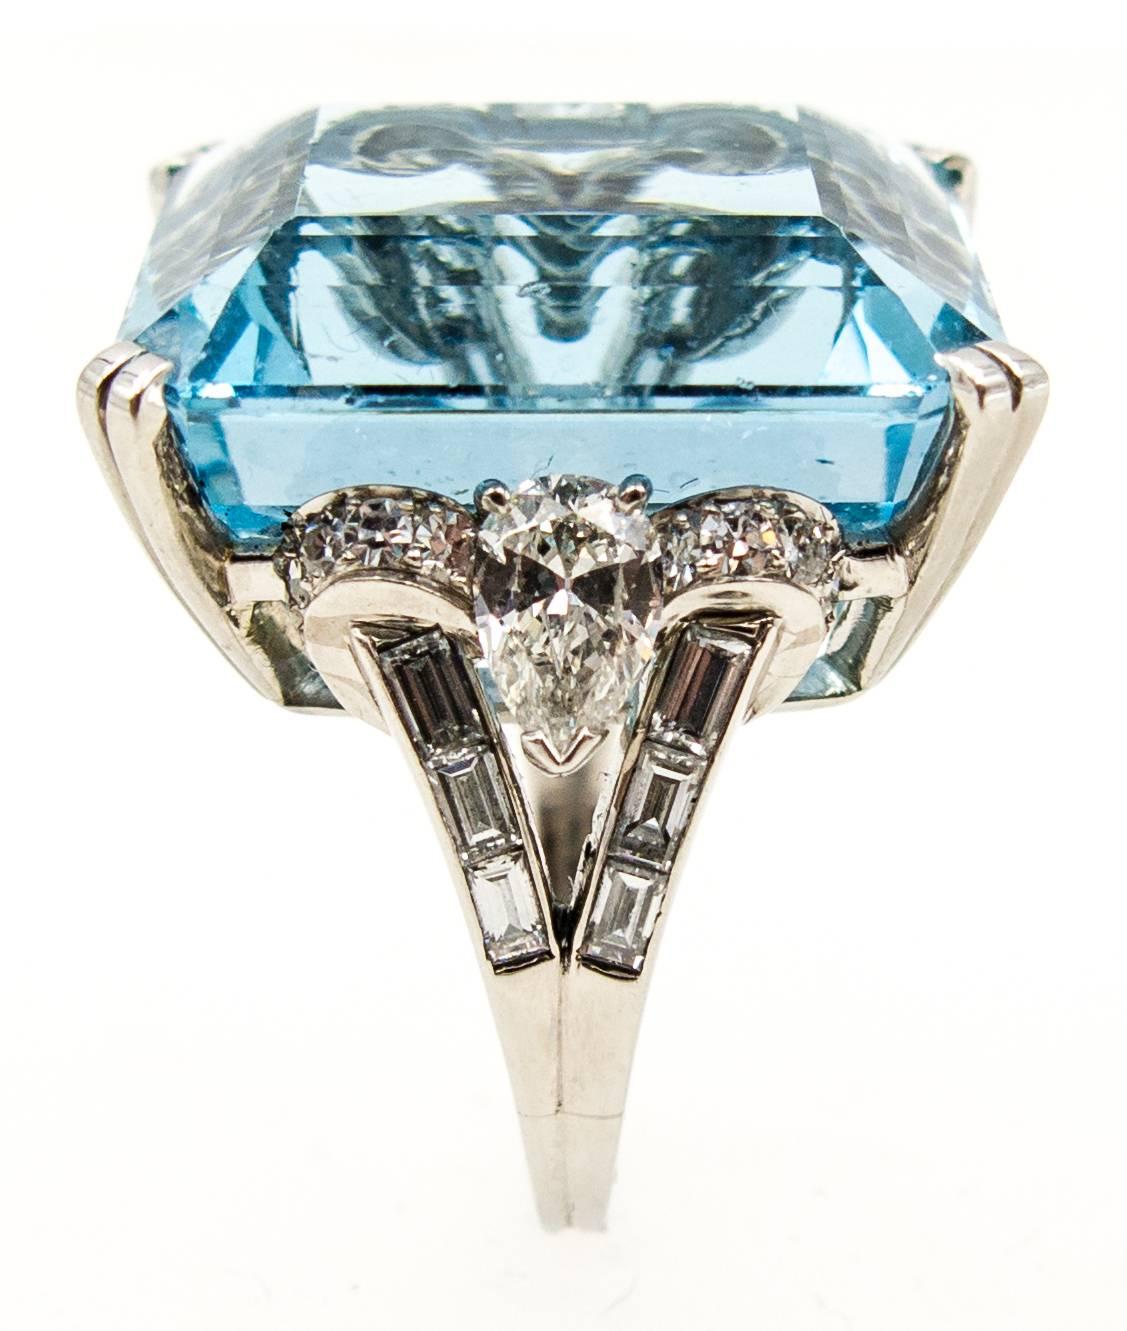 A truly one of a kind aquamarine and diamond ring for the discerning buyer.   A beautifully cut gem color, transparent turquoise blue aquamarine weighs about 32 1/2 carats, and is flanked at the shoulders with large, clean, white pear shaped